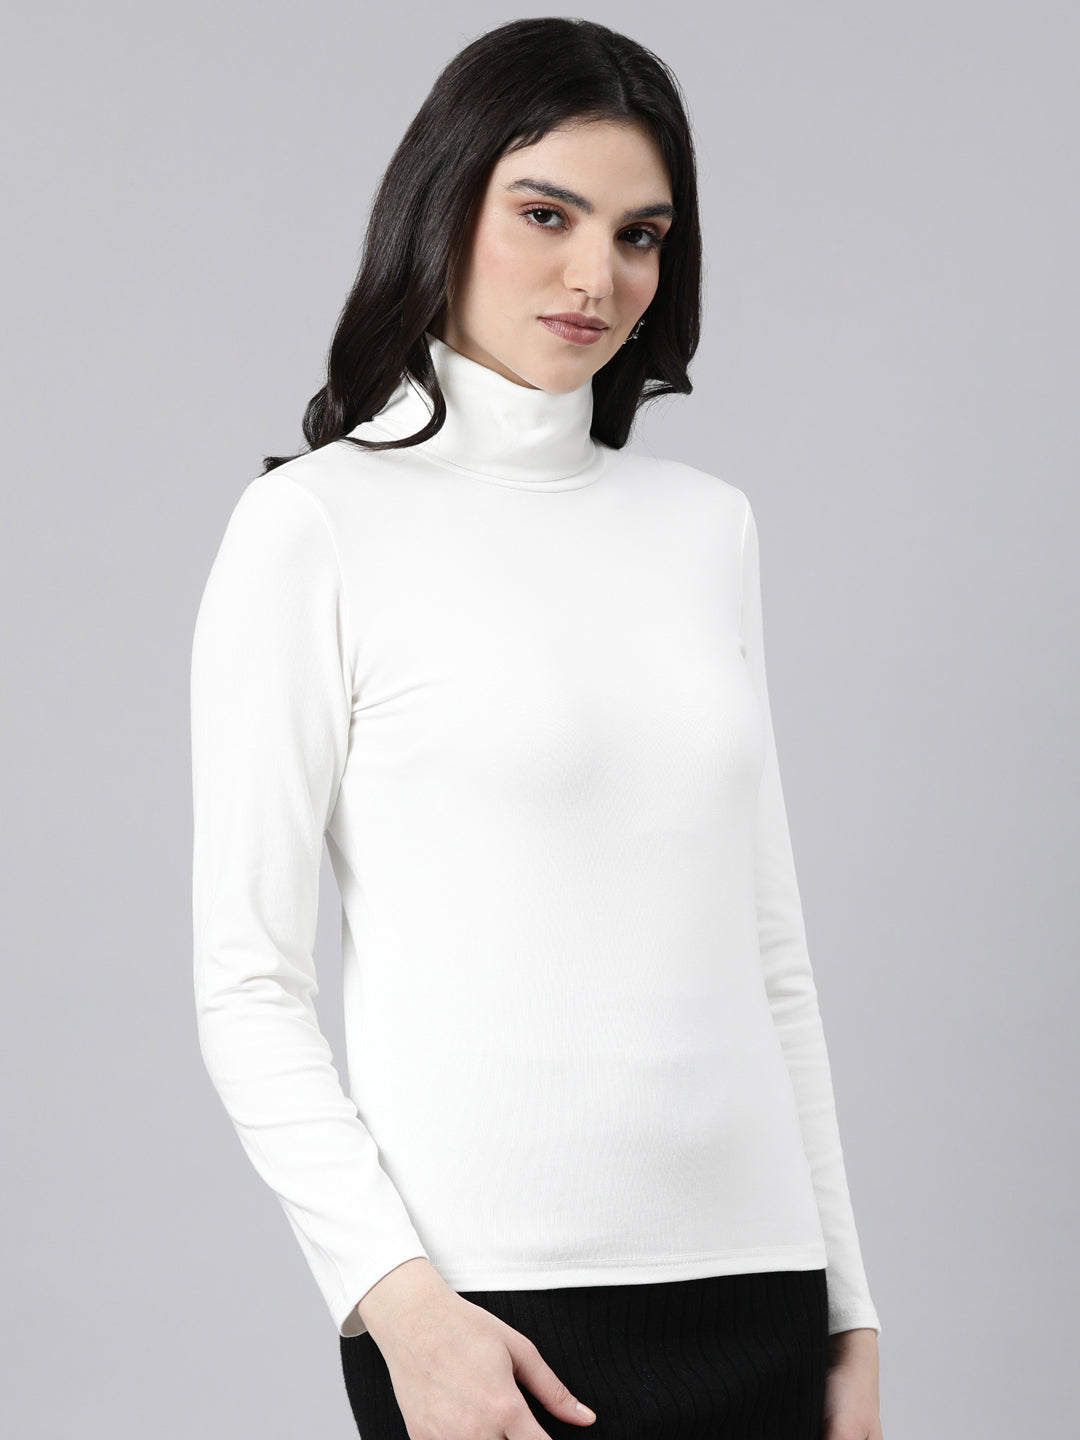 Women Solid Off White Top